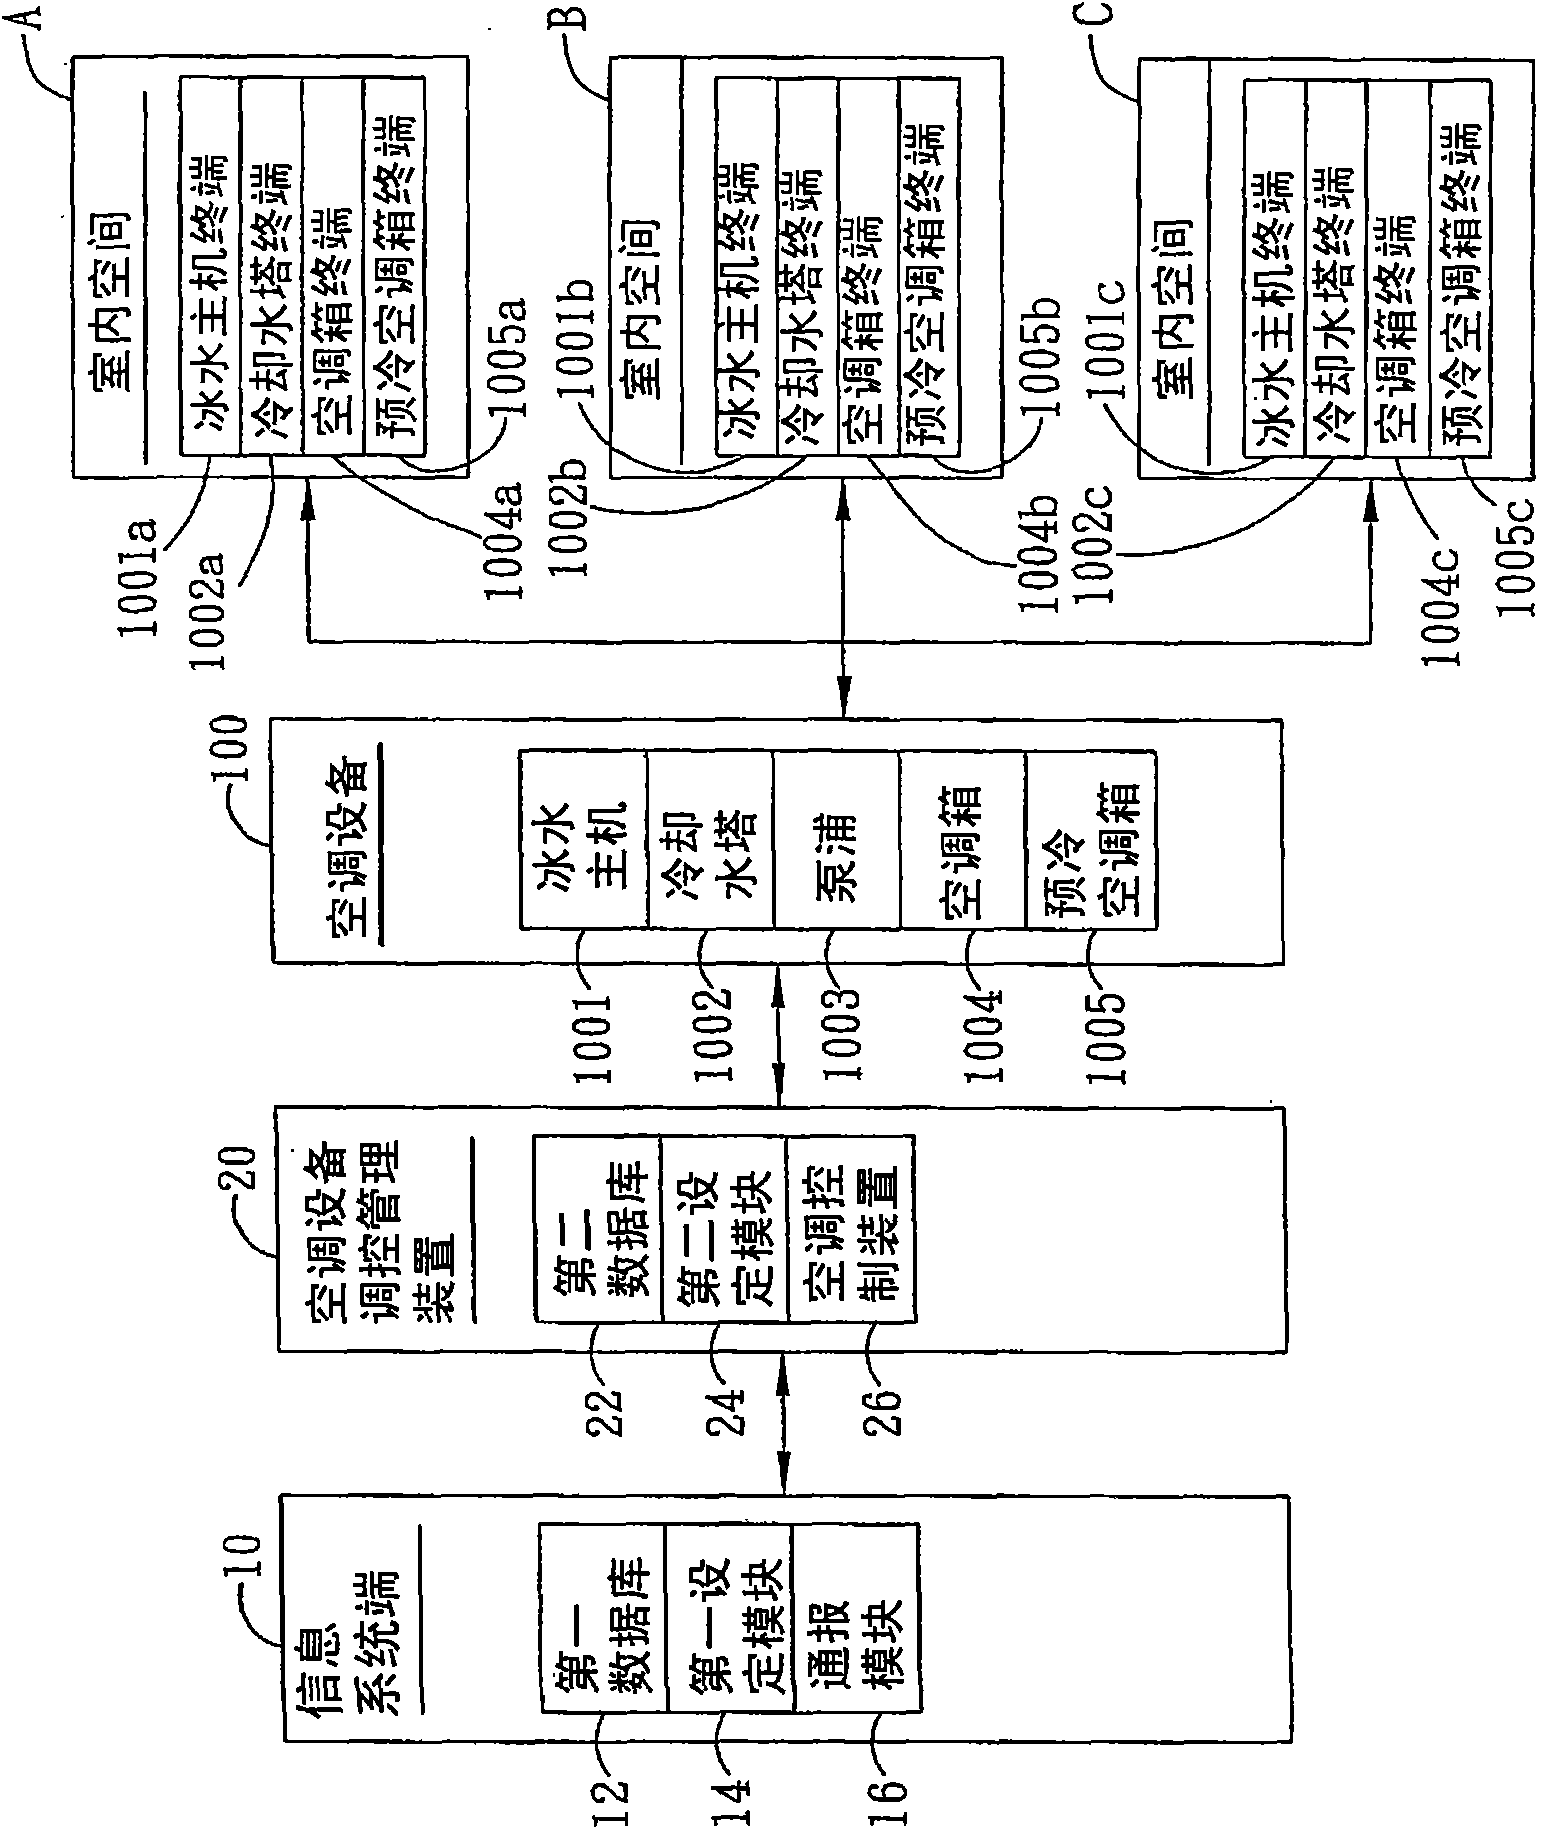 Air conditioning equipment regulation control management system for integrating information system